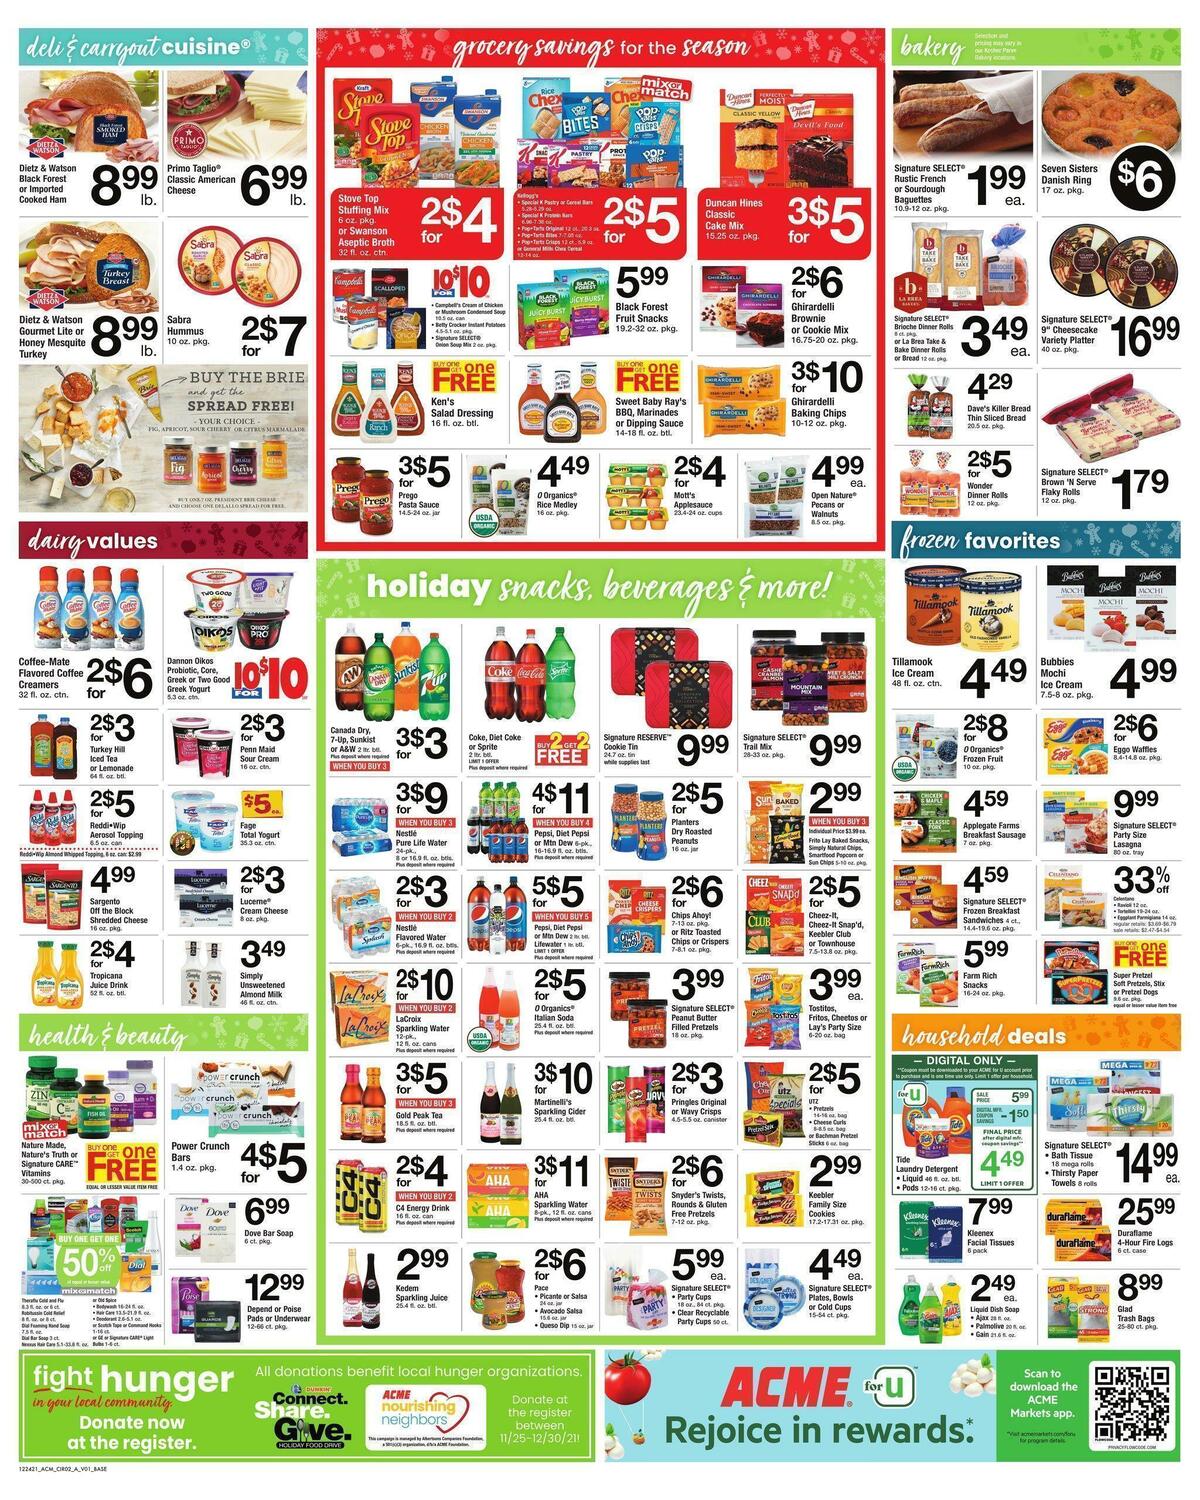 ACME Markets Weekly Ad from December 24